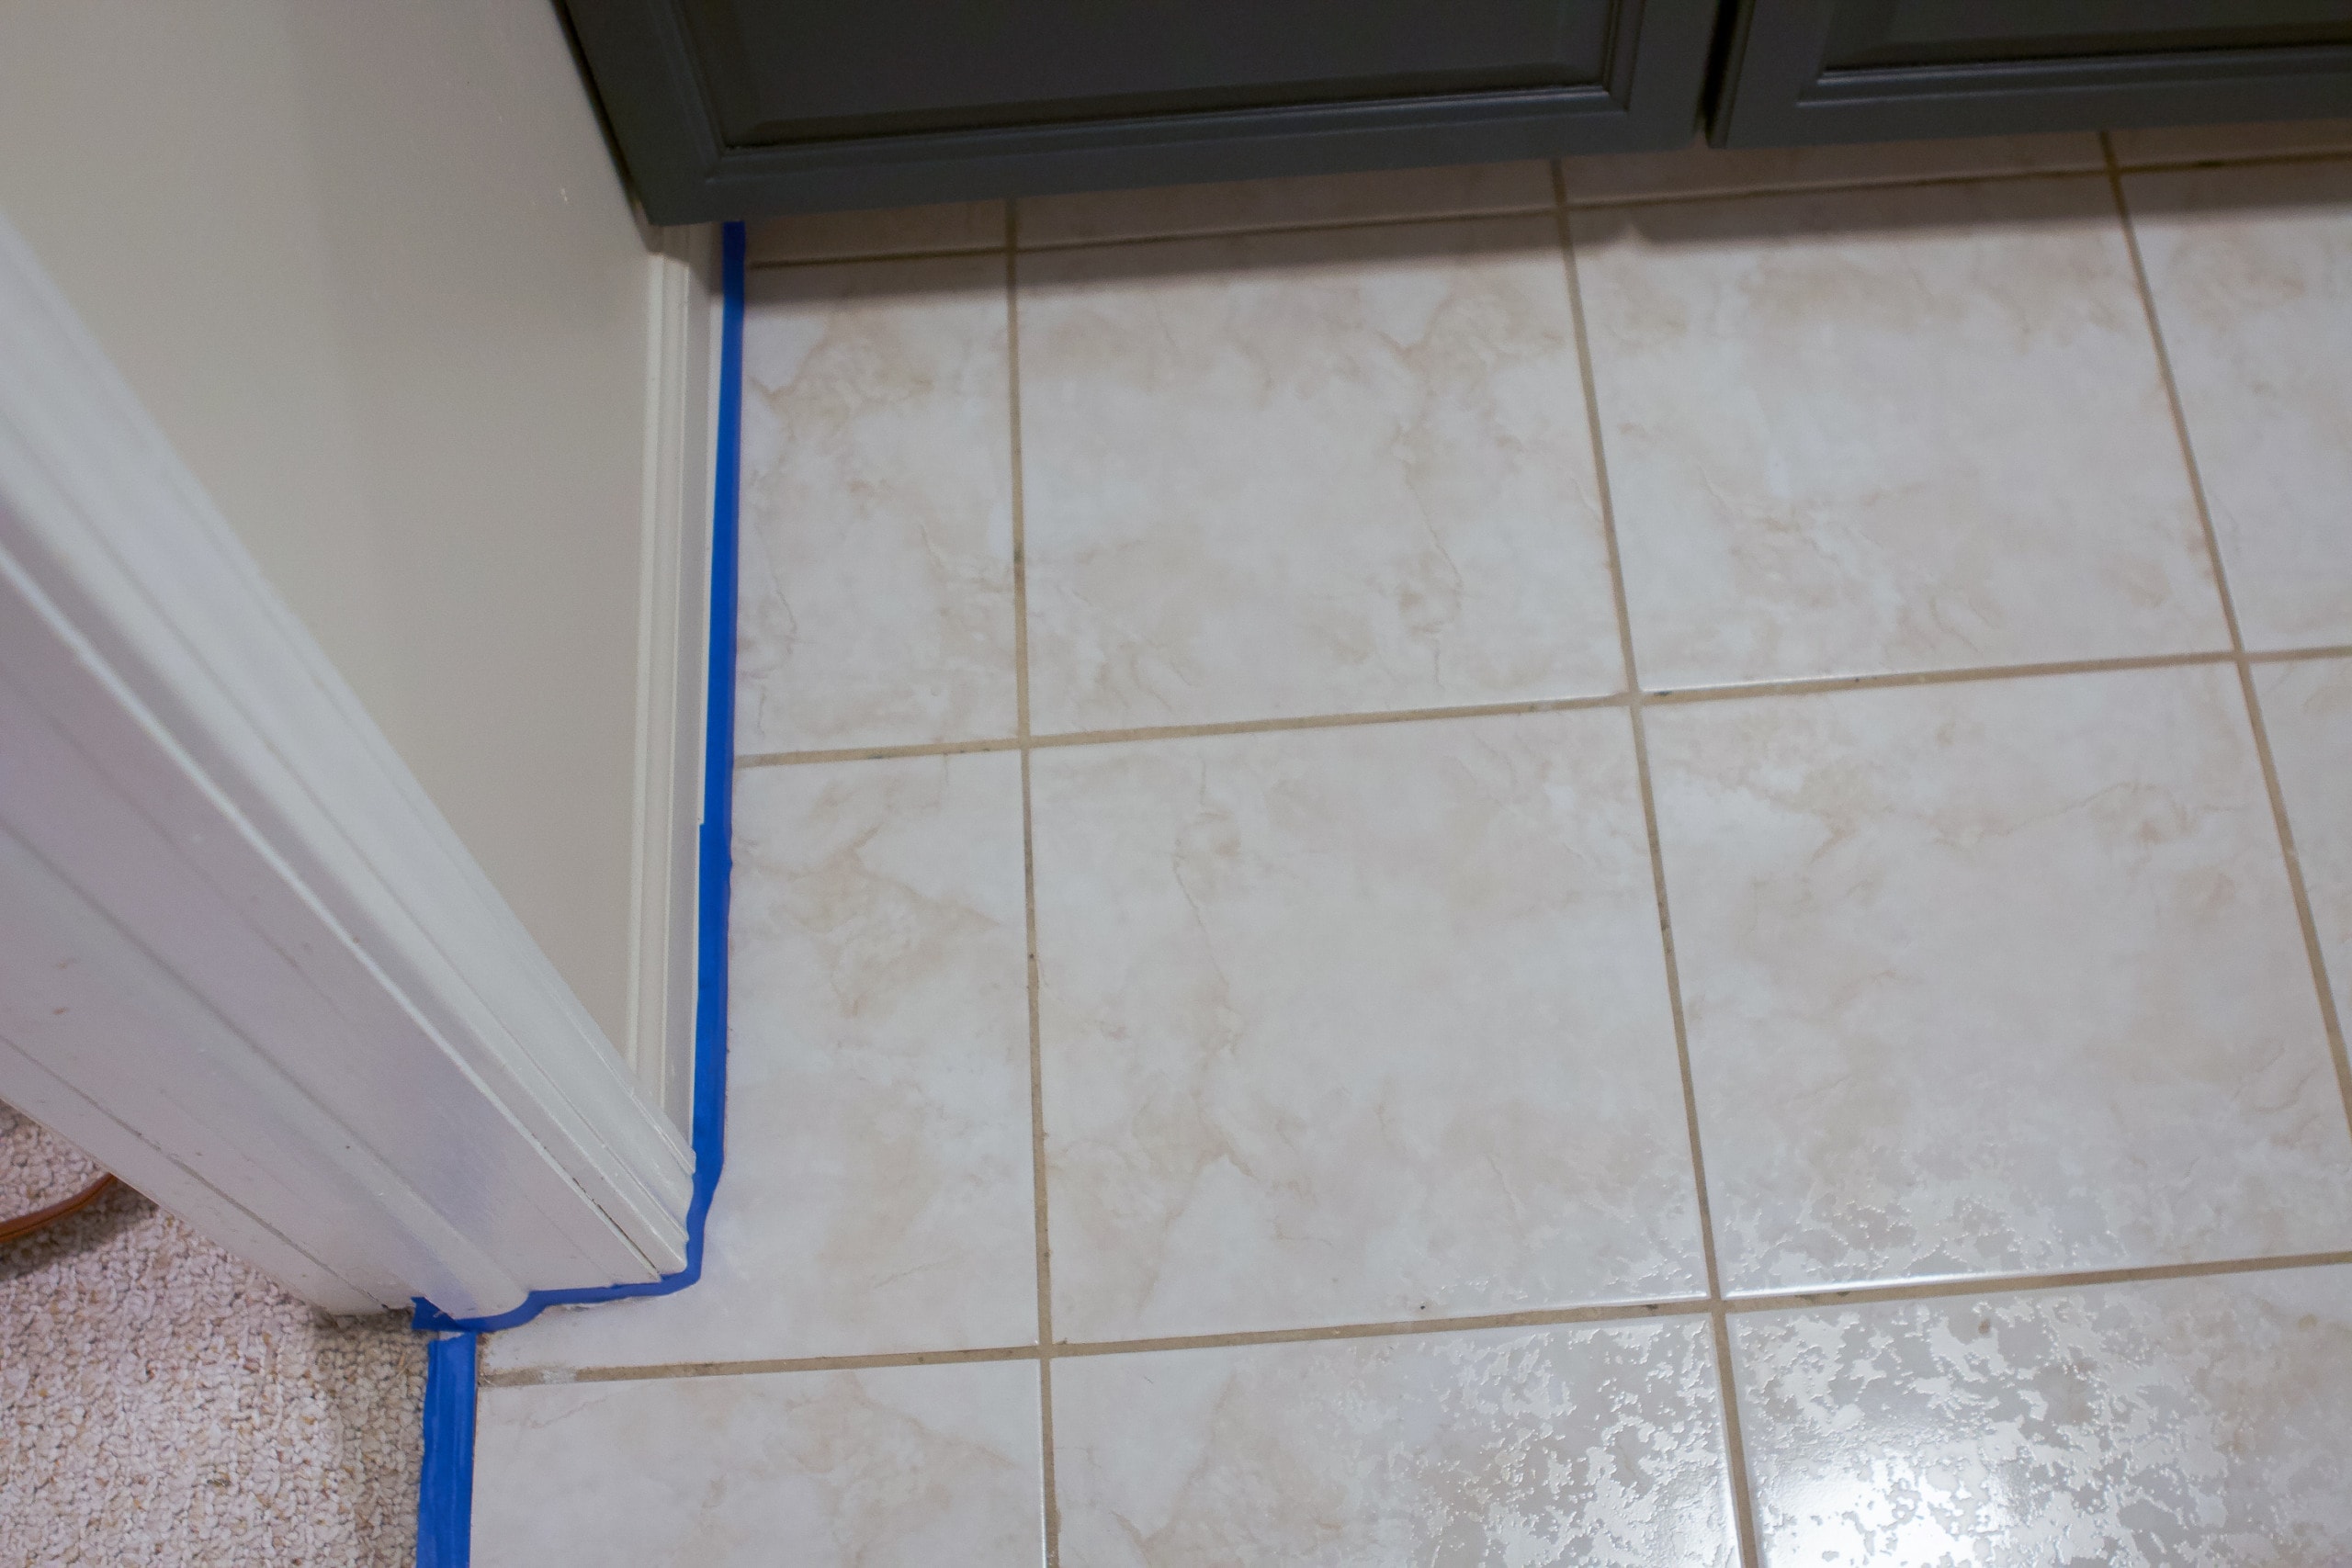 Once the floor is clean, you can tape off the baseboards